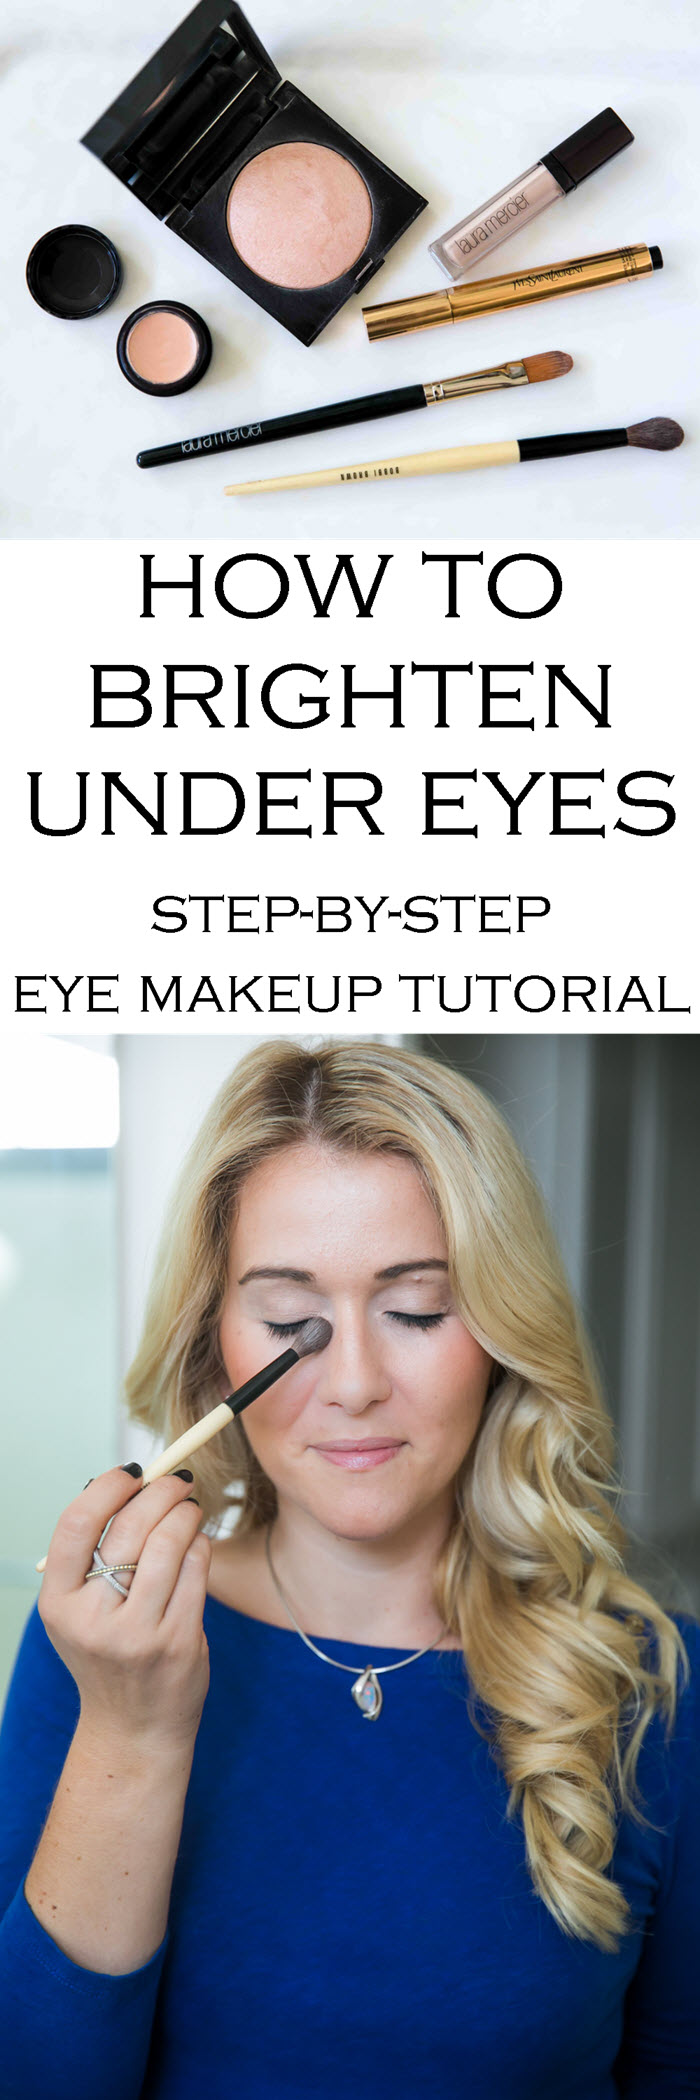 How to Brighten Under Eyes. This Step by Step Eye Makeup Tutorial shows you which products to use and how to apply them properly. #beauty #beautytips #eyemakeup #lauramercier